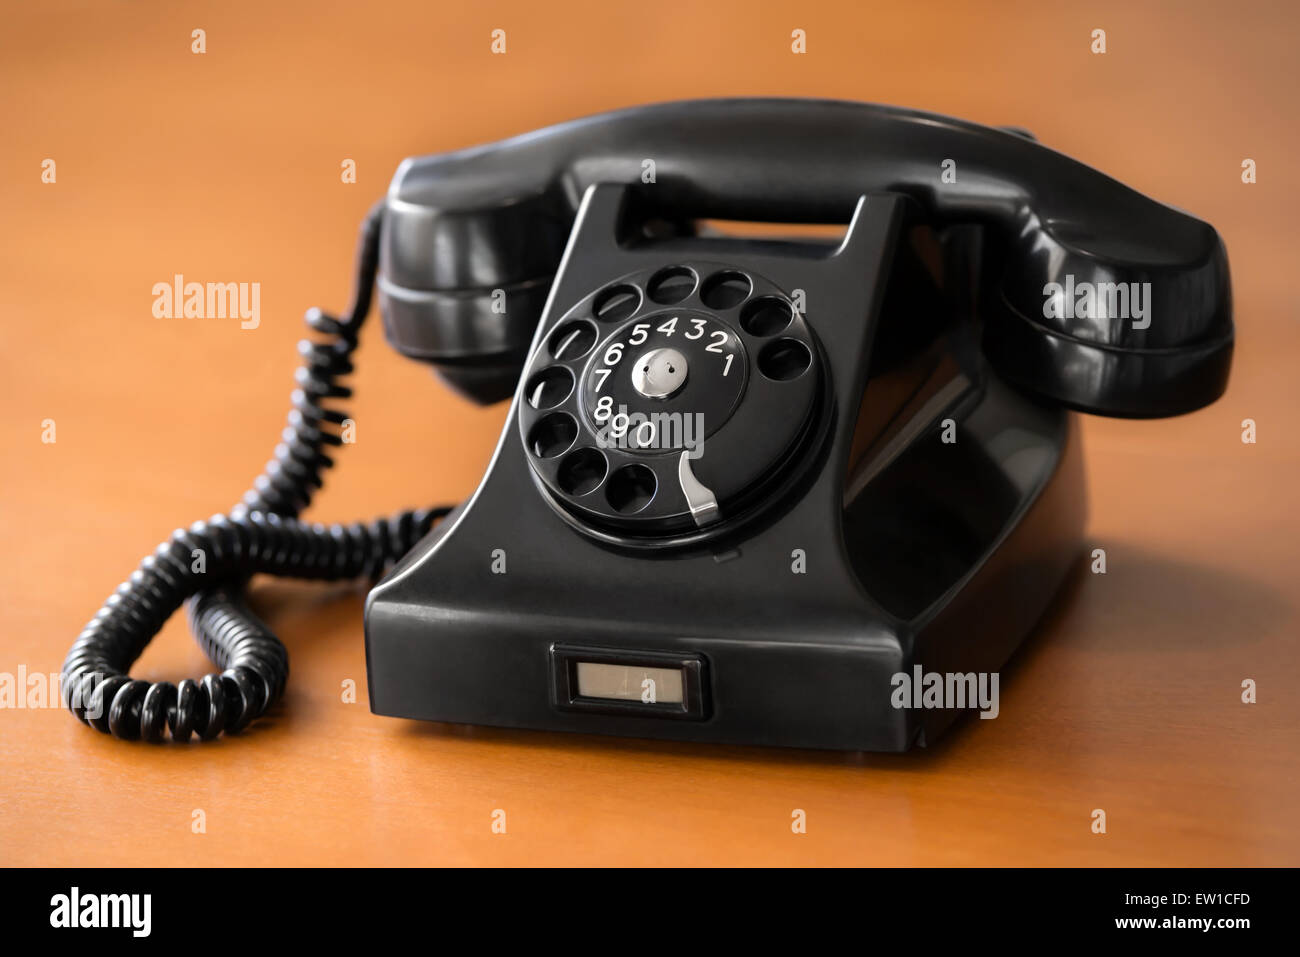 Old fashioned retro rotary dial phone on wooden desk Stock Photo